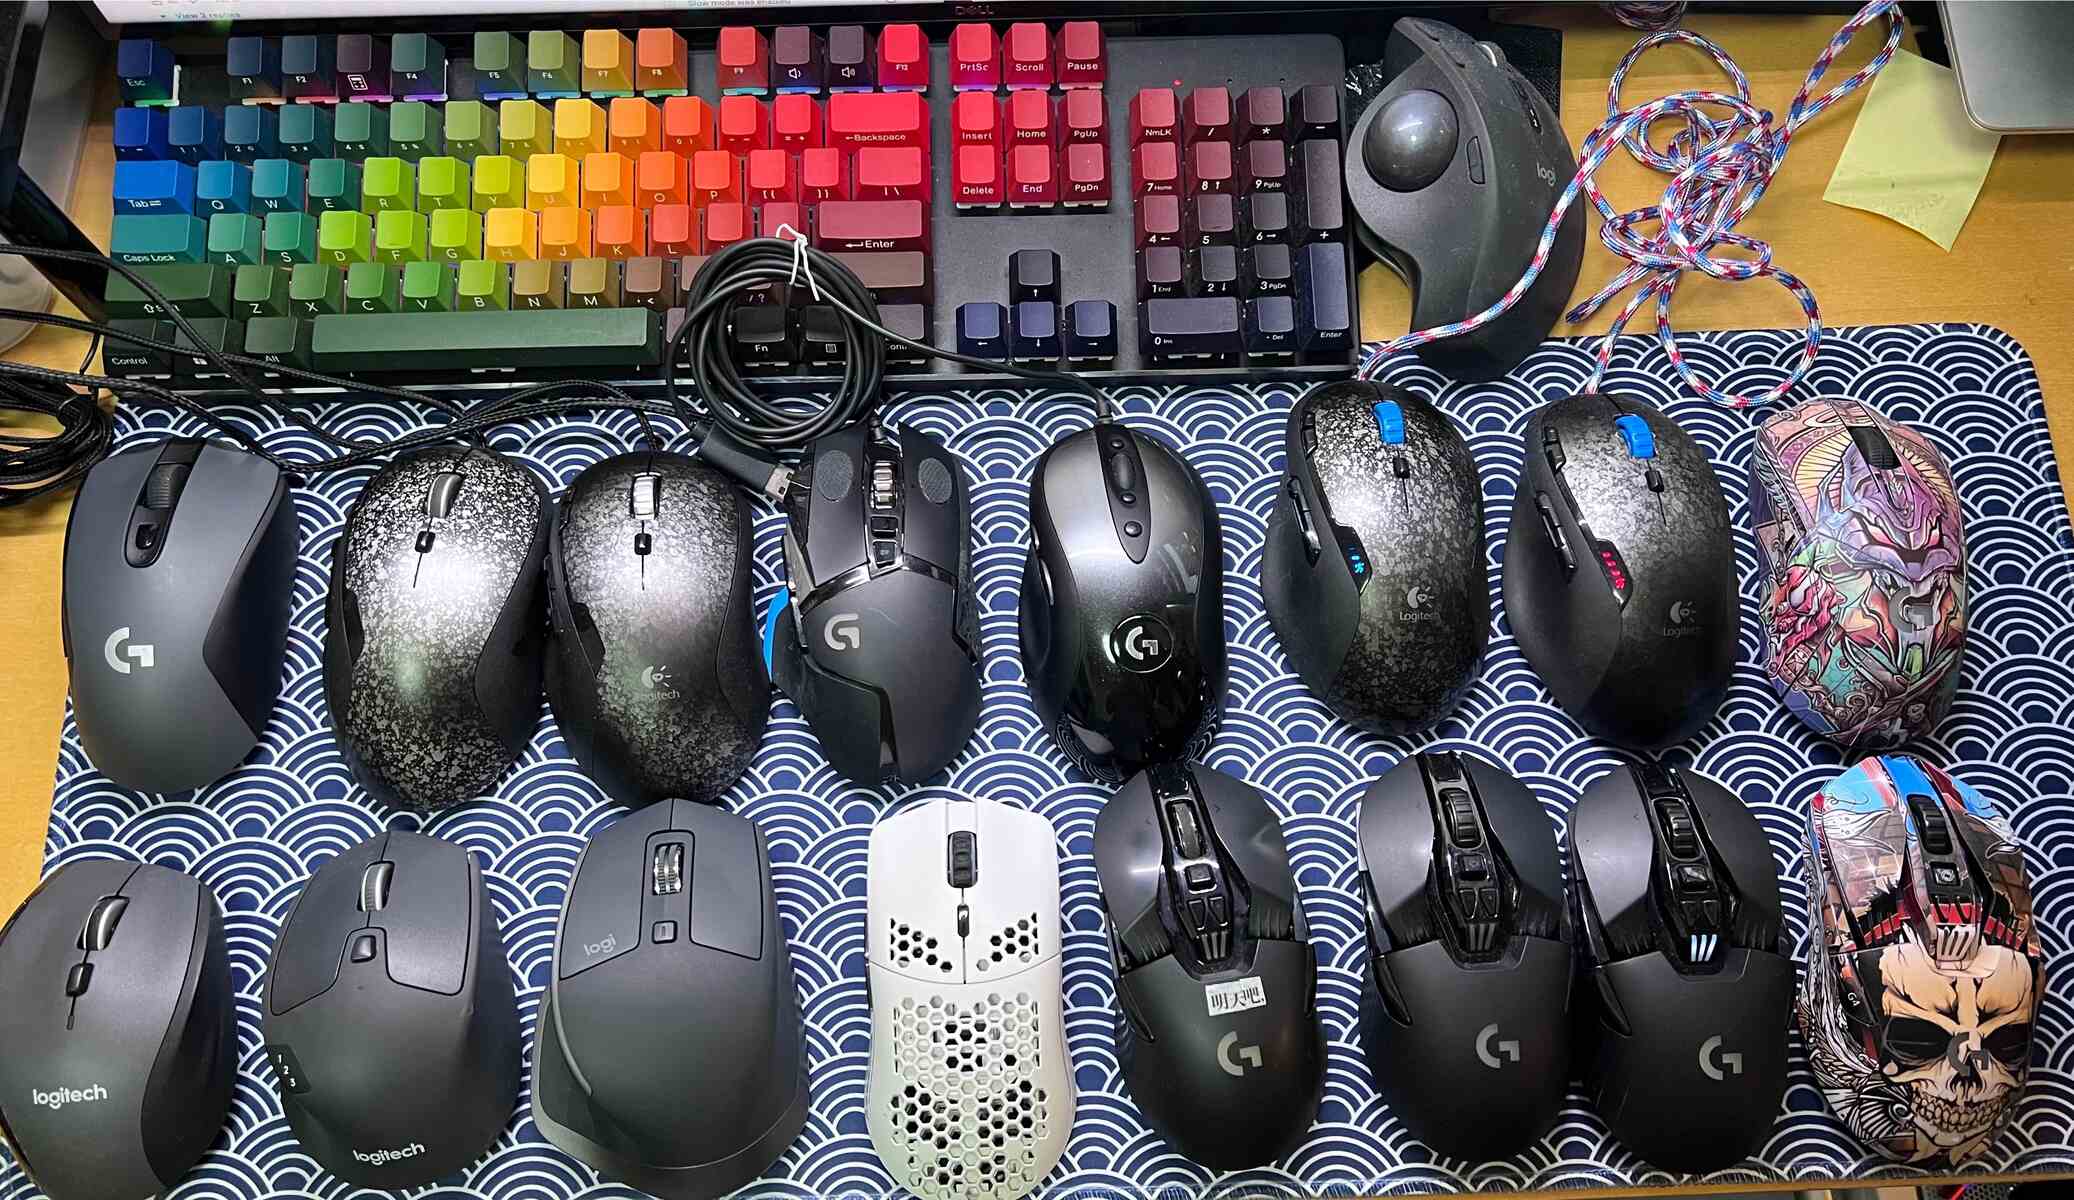 How To Fix Logitech G500 Gaming Mouse